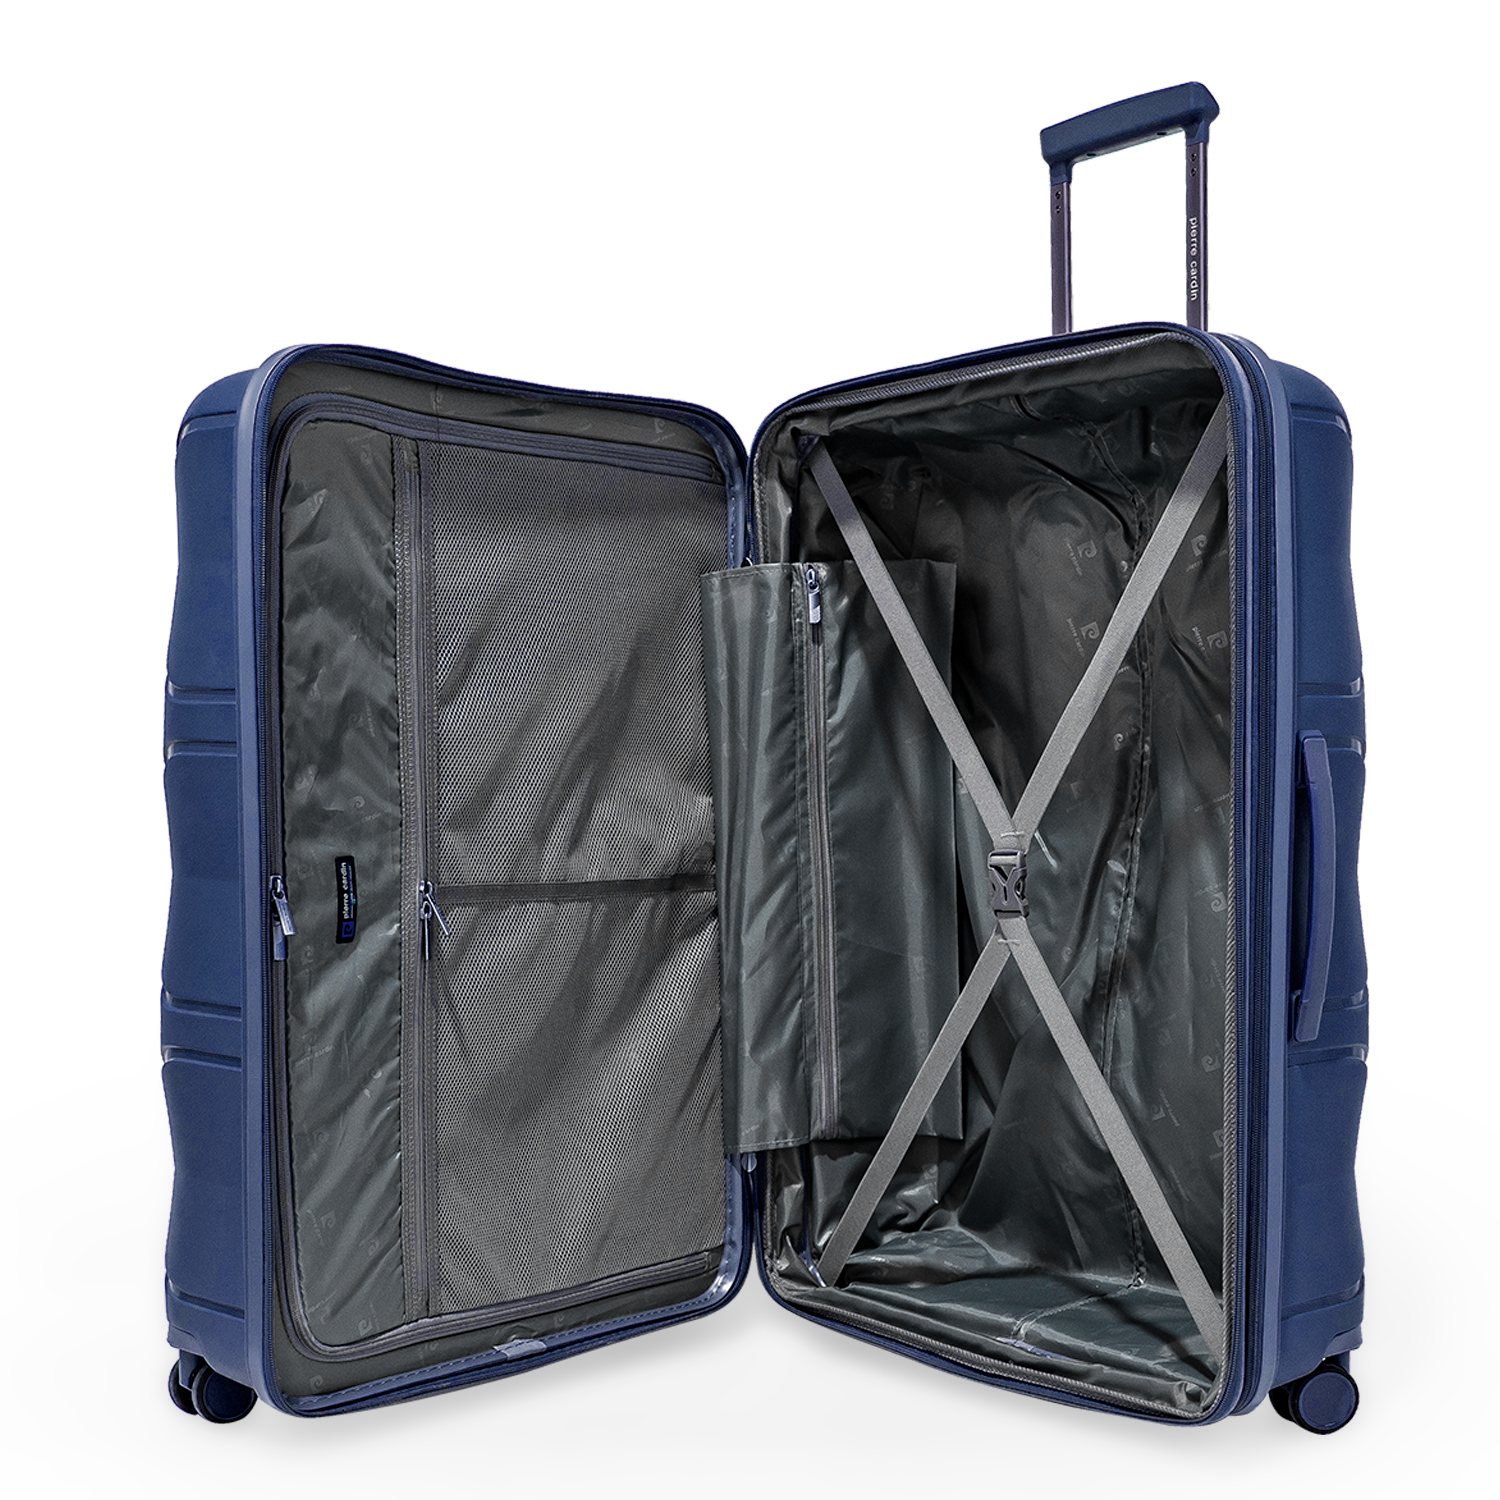 Pierre Cardin Trolley Strong Flexible Suitcases Check-In GreyBlue